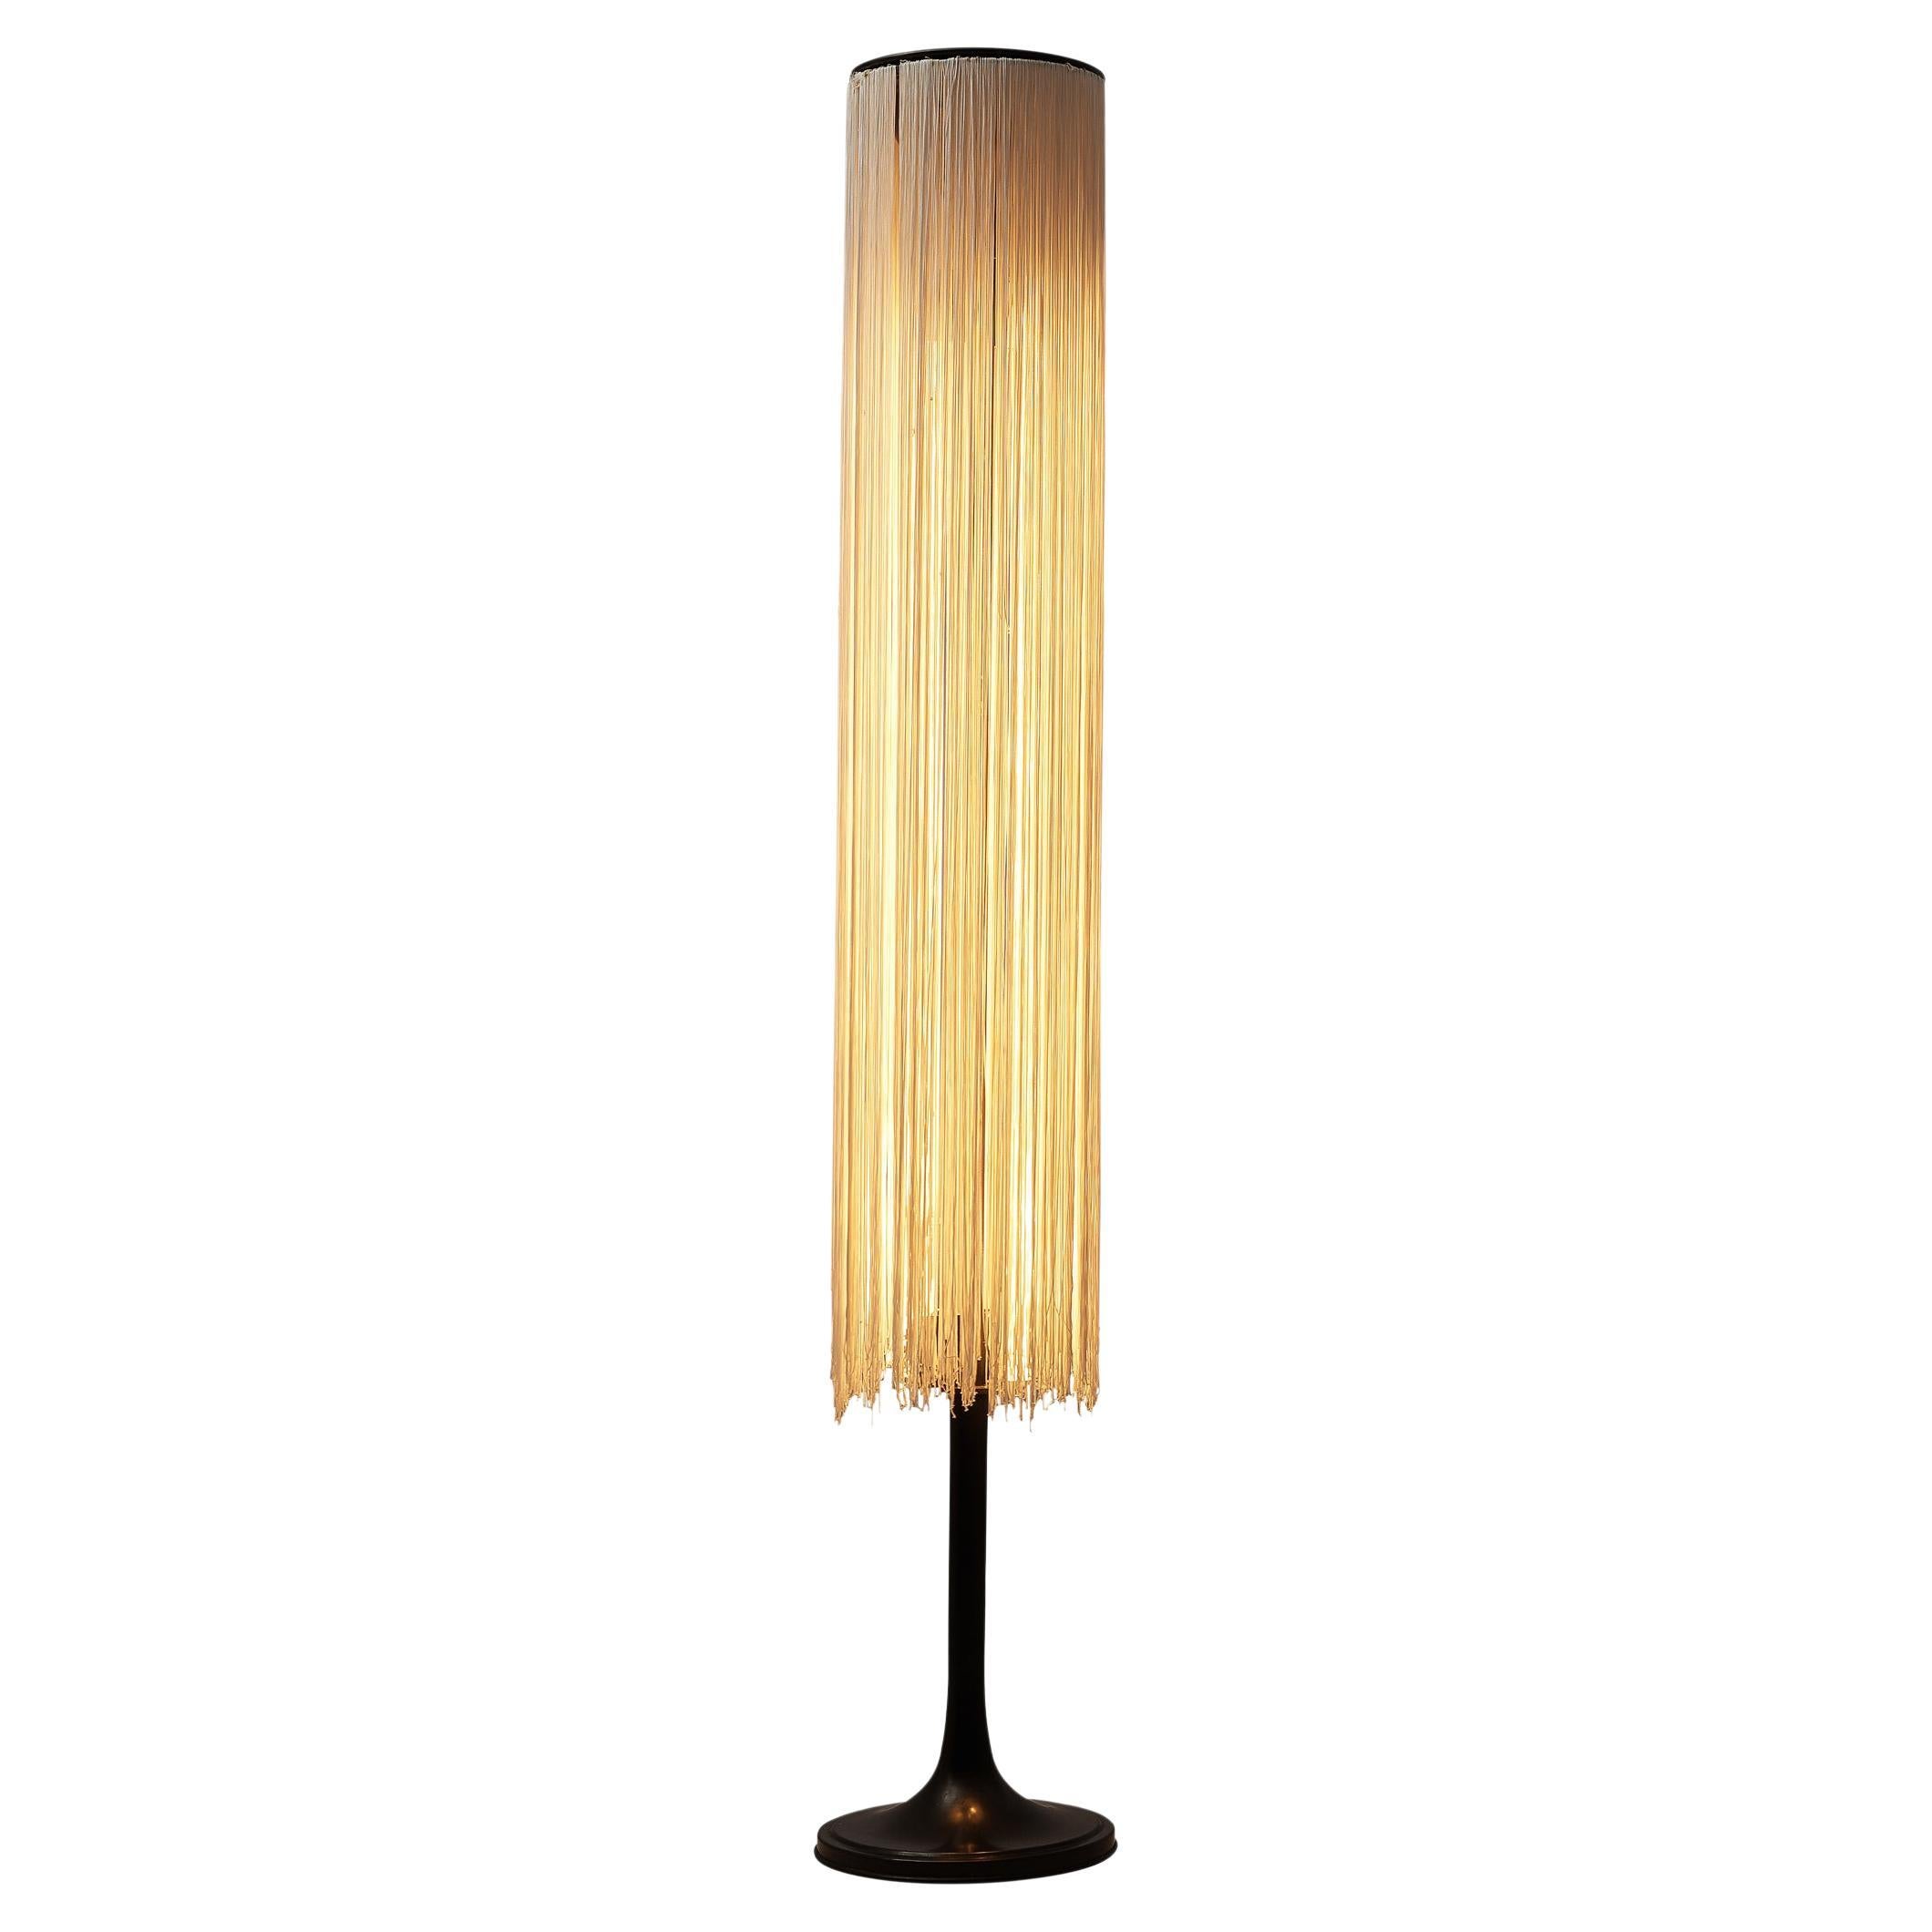 Gino Sarfatti for Arteluce Floor Lamp in Enameled Brass and Rayon